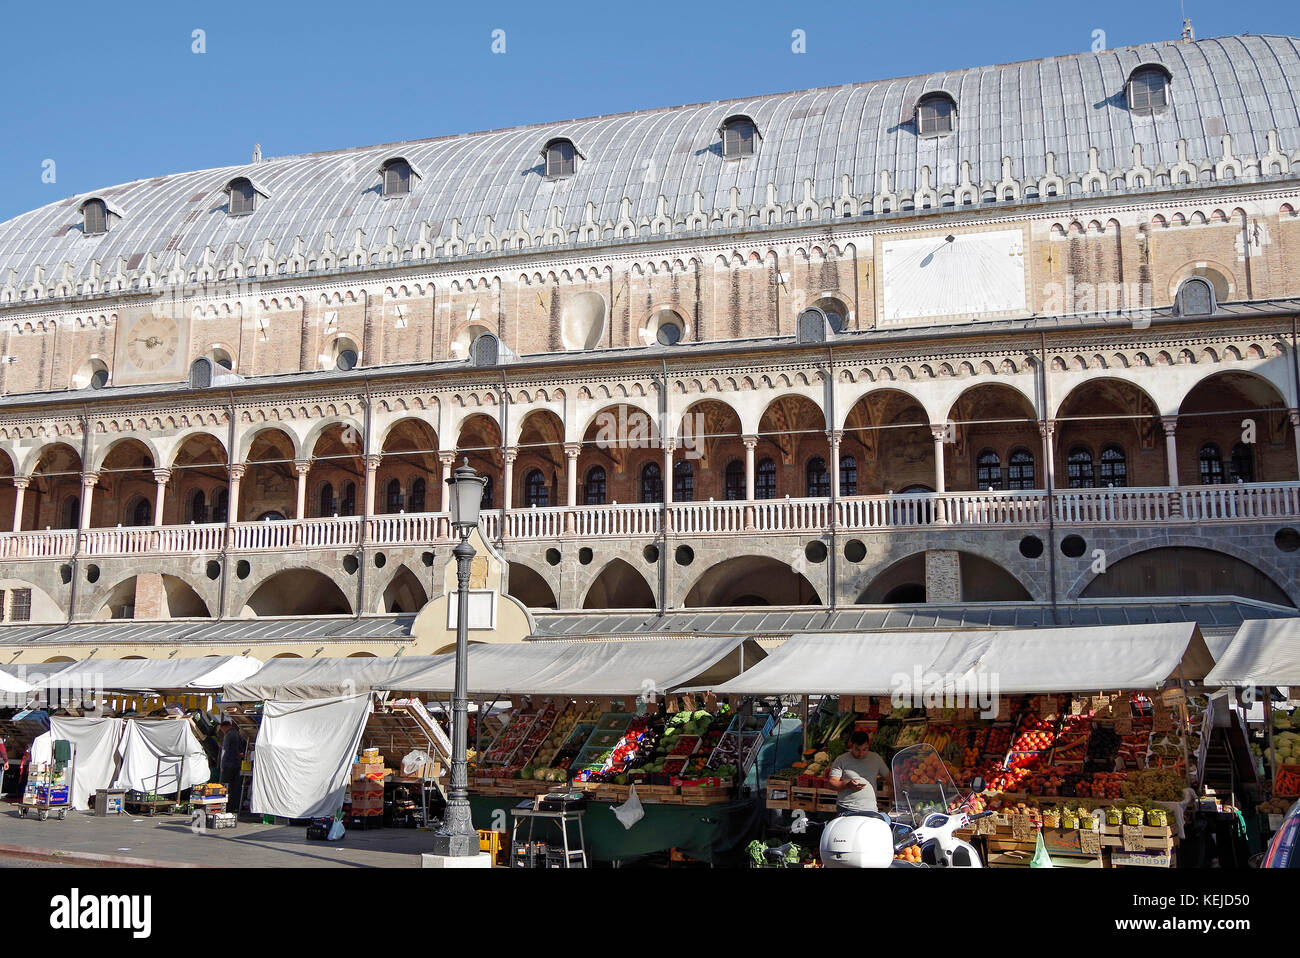 Palazzo della Ragione, medieval seat of government & commerce,  flower market on one side, & herb market on the other, Stock Photo